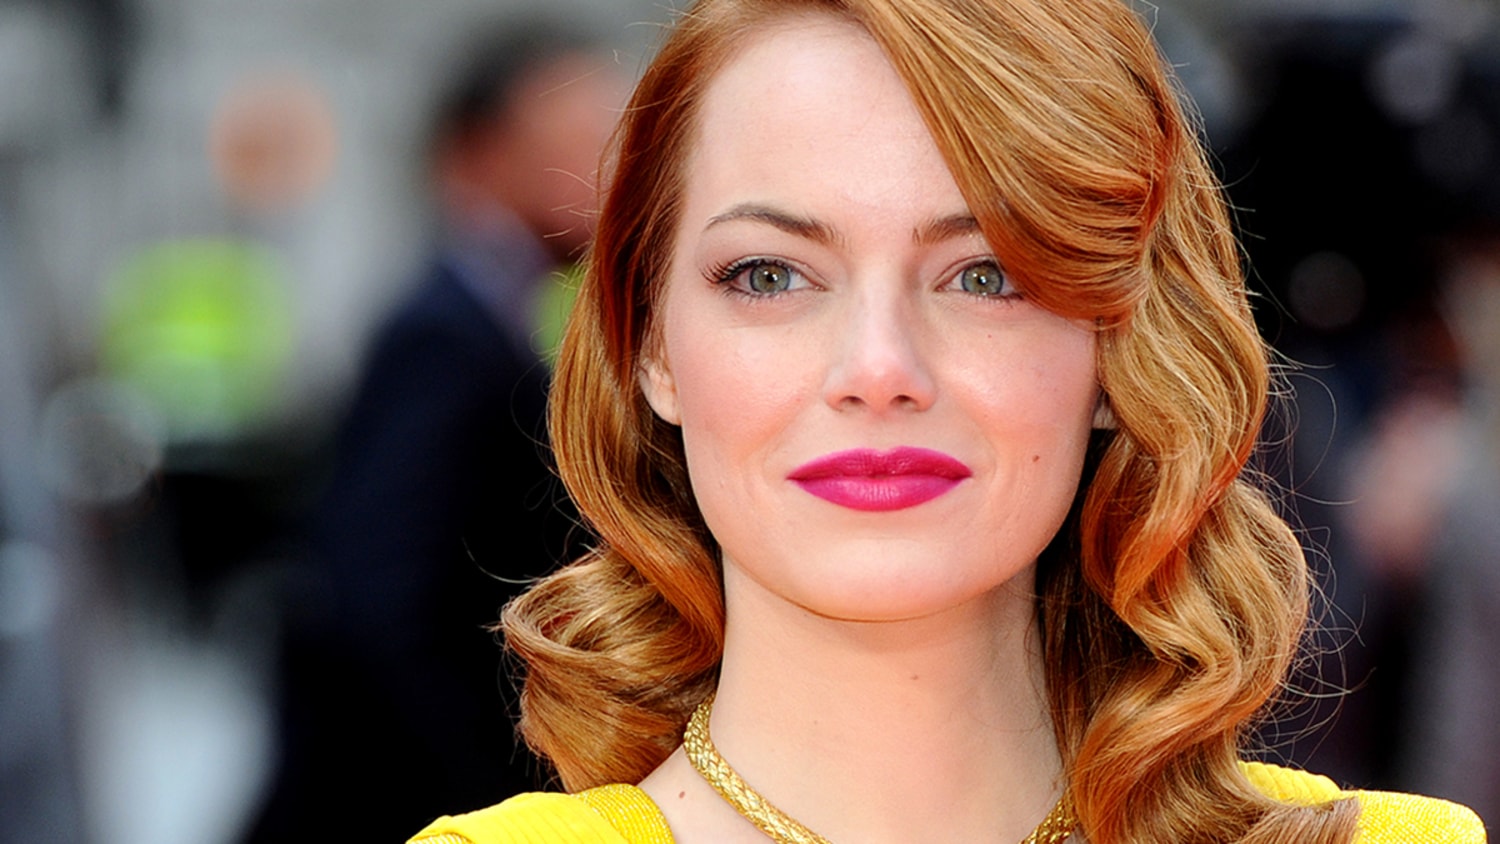 Emma Stone debuts pixie cut on cover of Vogue